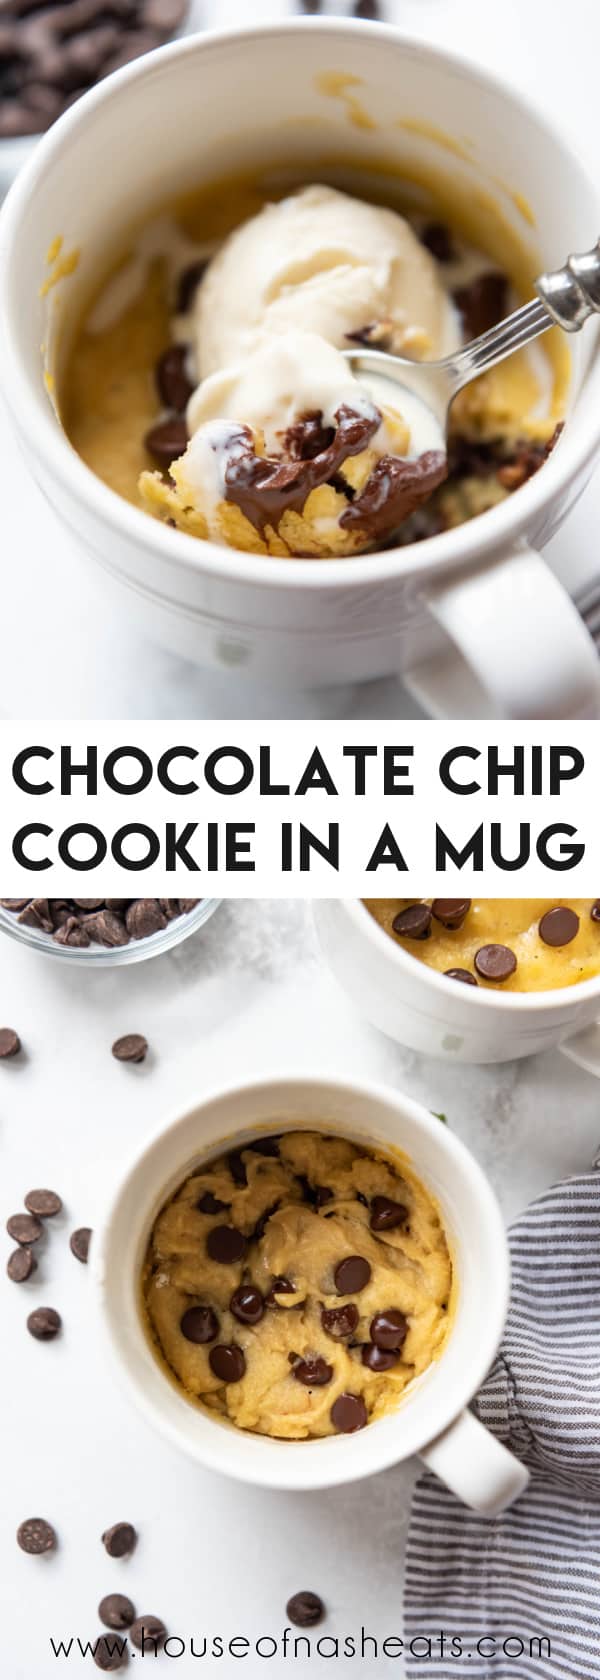 A collage of images of chocolate chip cookie in a mug with text overlay.